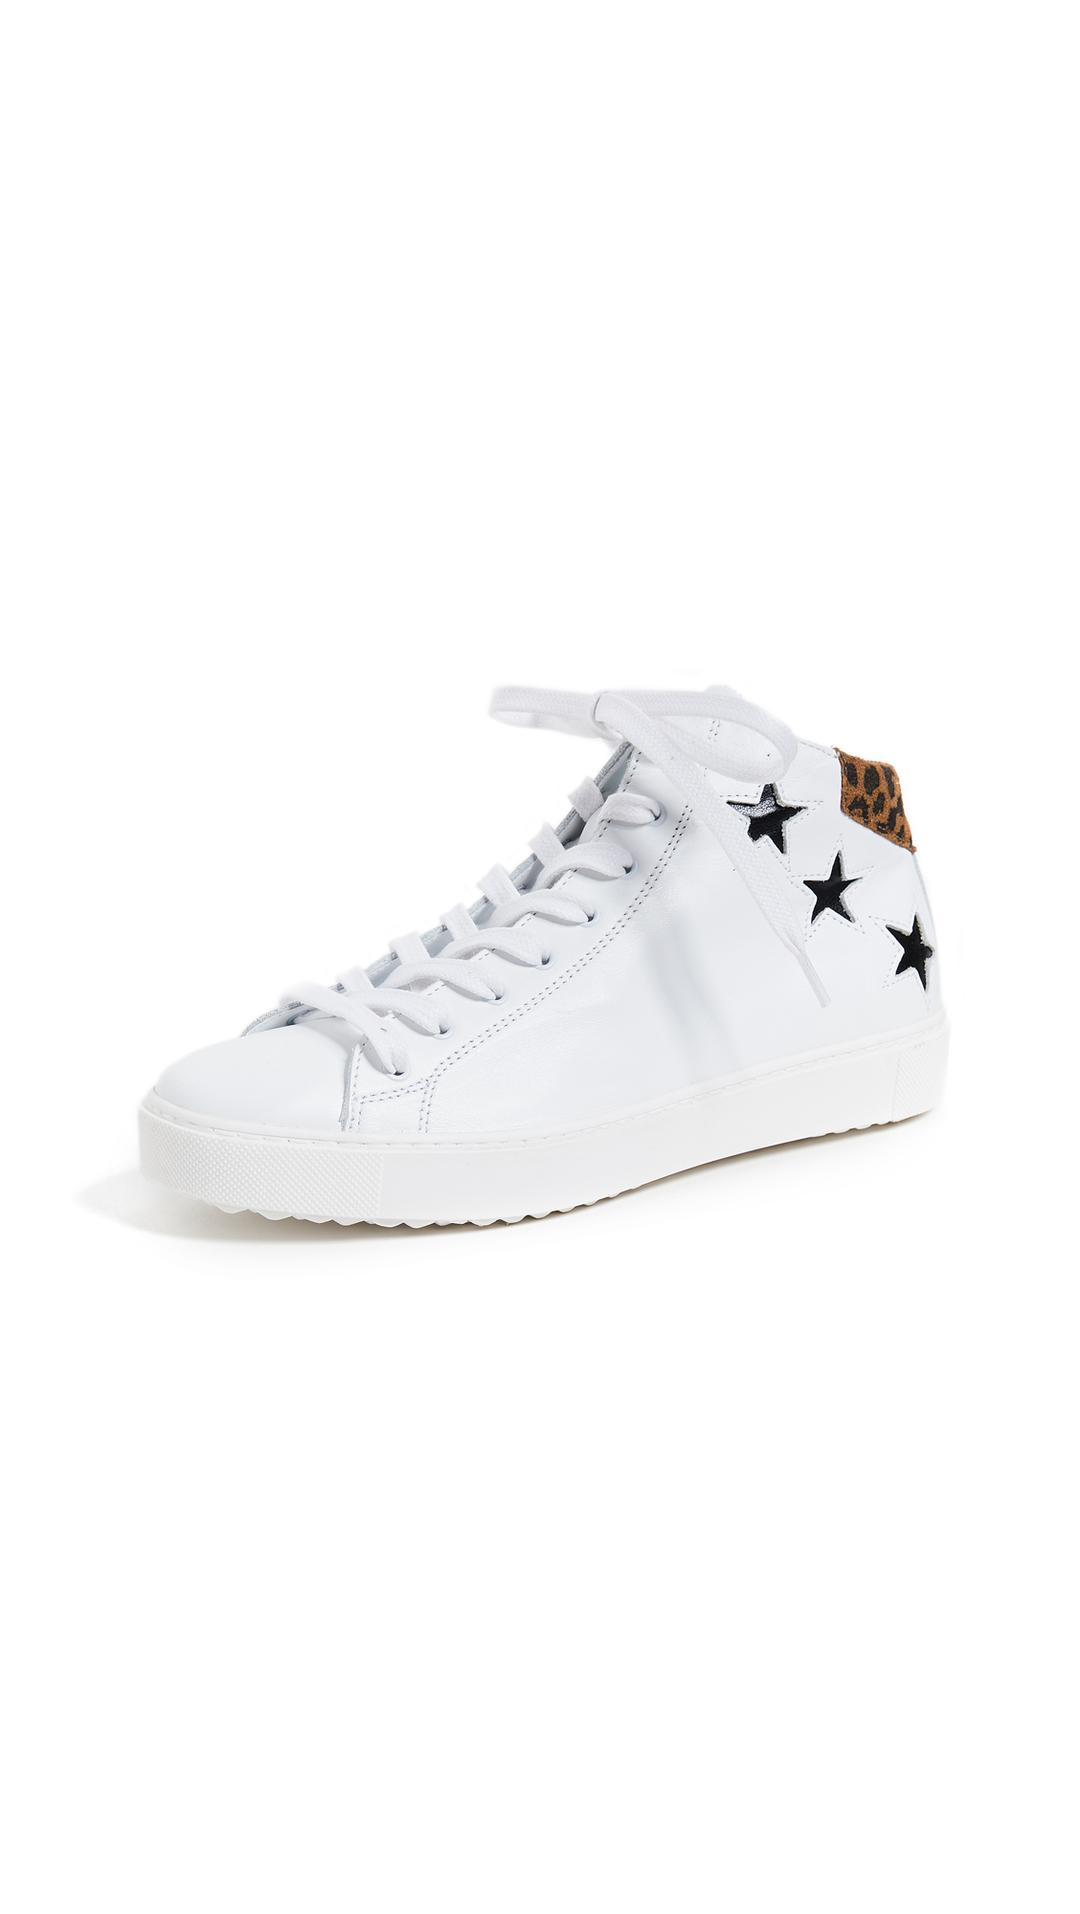 15 High-Top Sneakers to Add to Your 